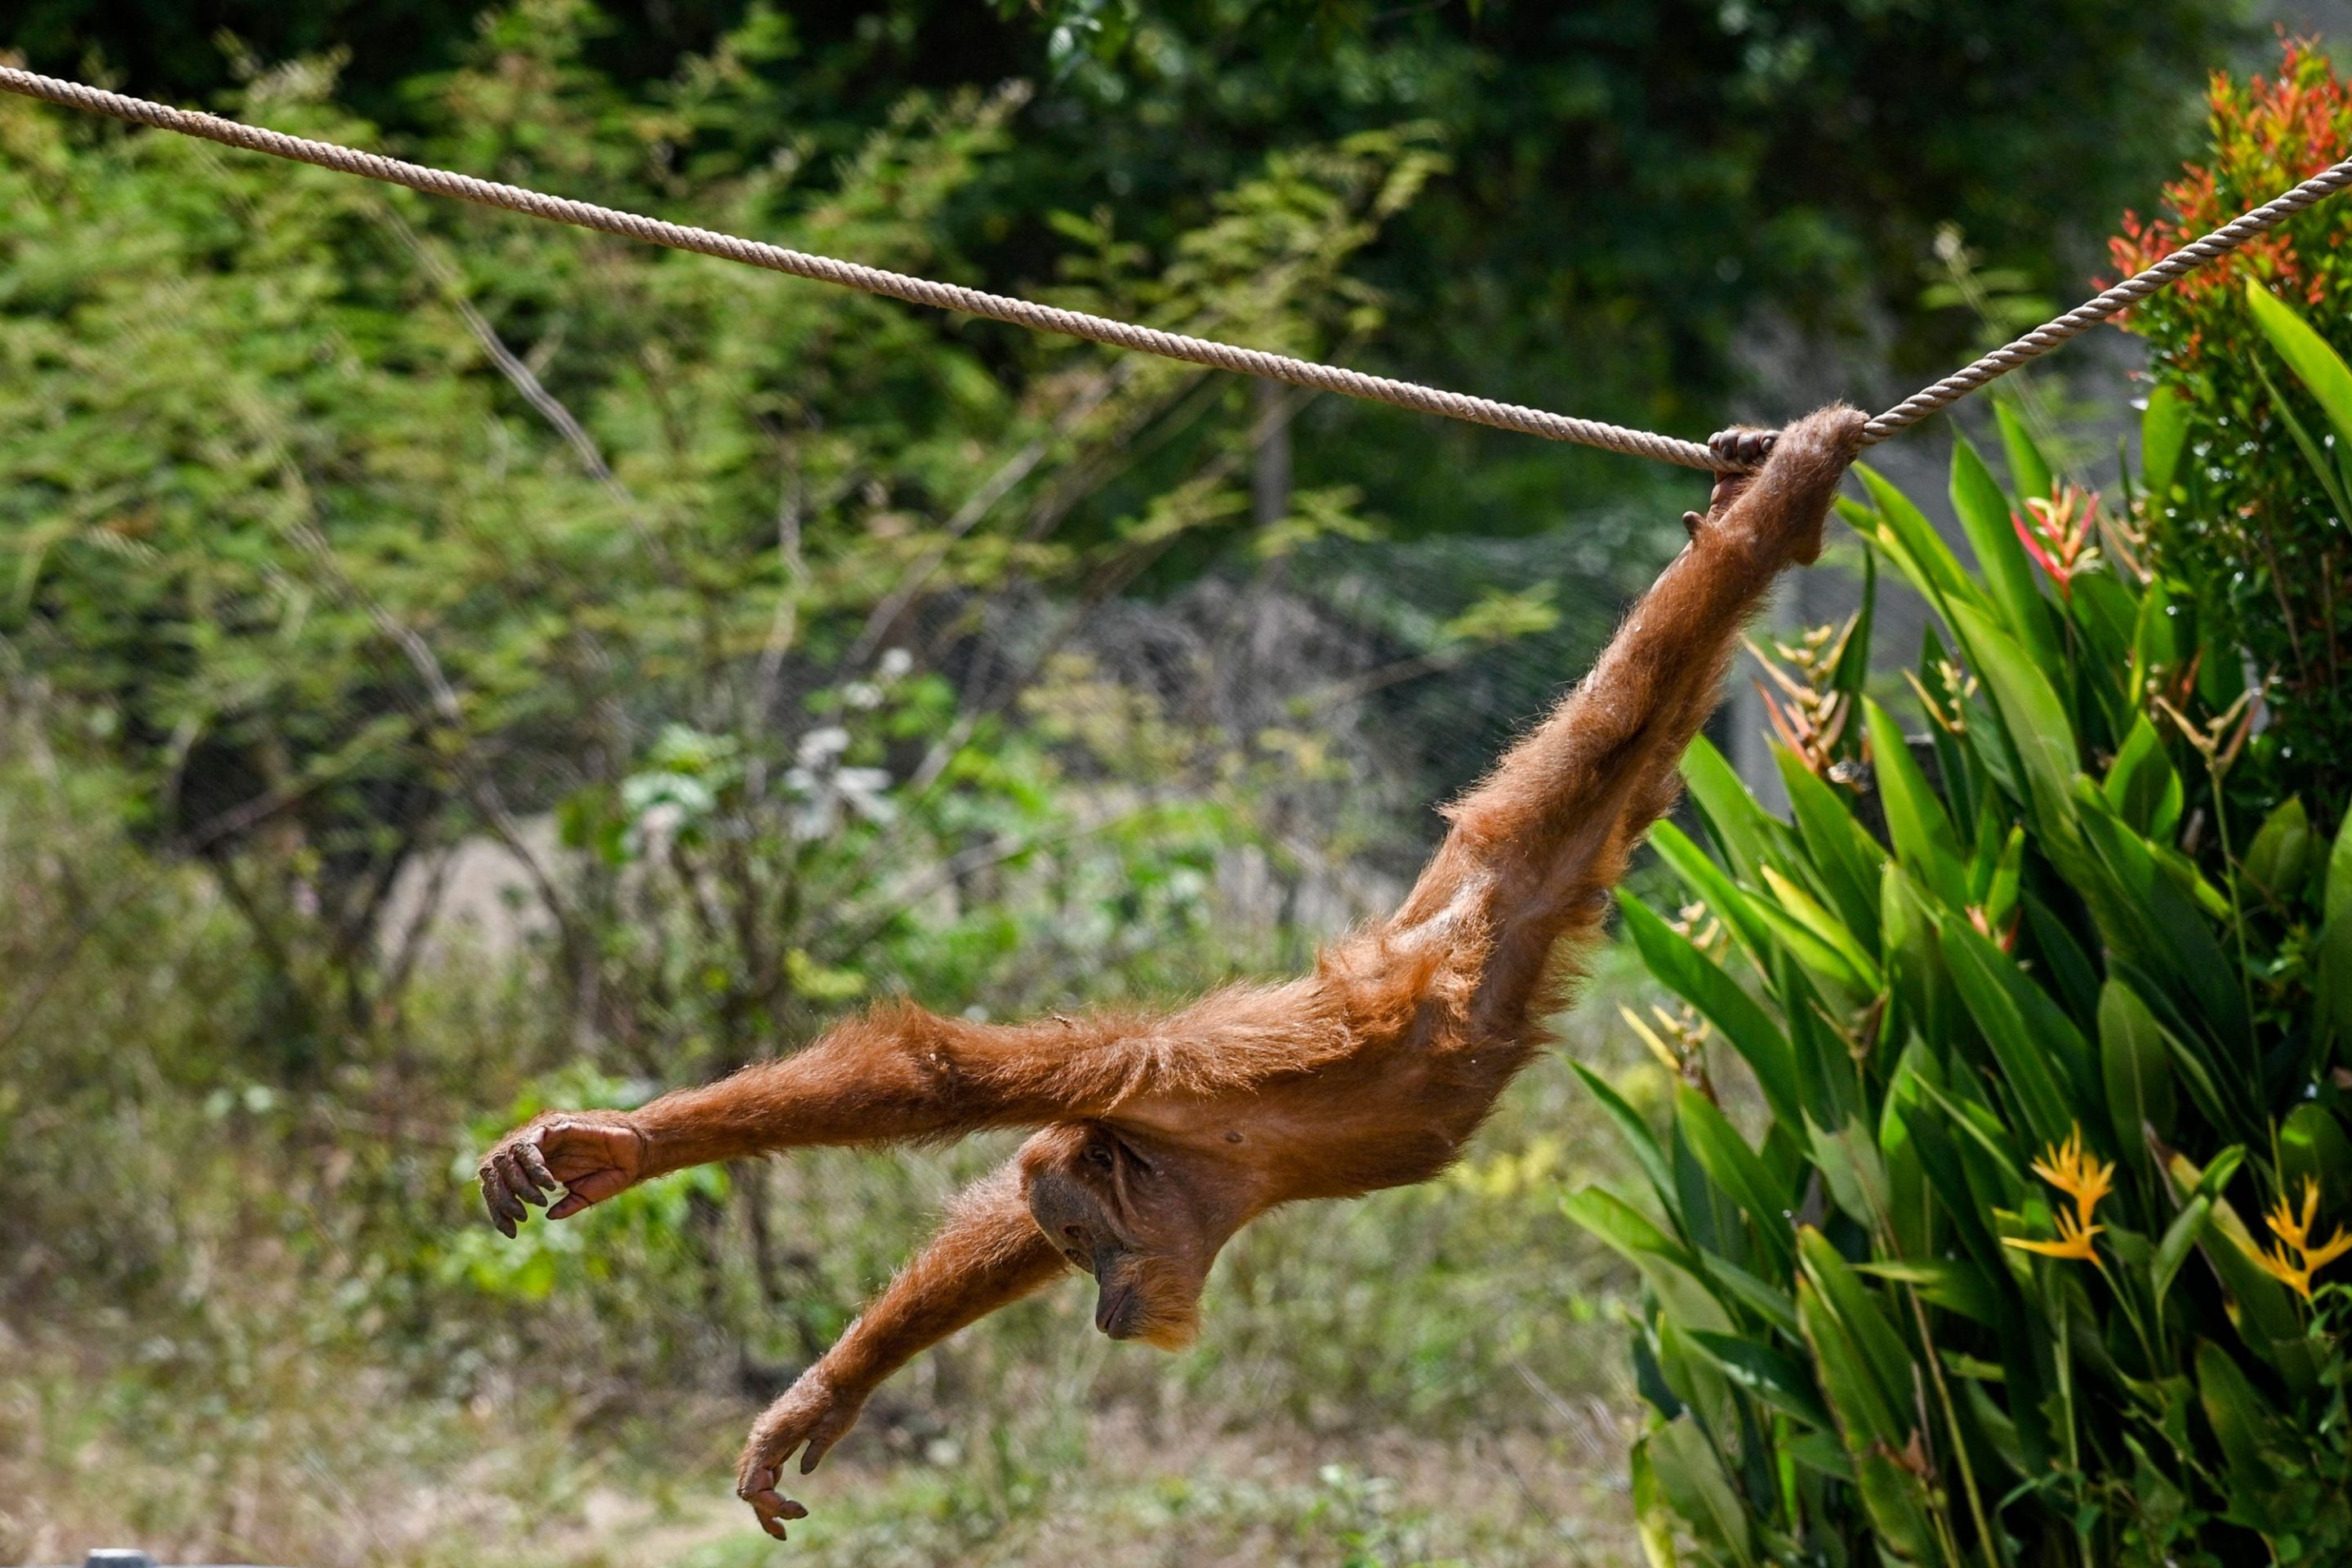 A Sumatran orangutan swings on a rope at the safari park and zoo in Jantho, Aceh province on October 10, 2021. (Photo by CHAIDEER MAHYUDDIN / AFP) (Photo by CHAIDEER MAHYUDDIN/AFP via Getty Images)